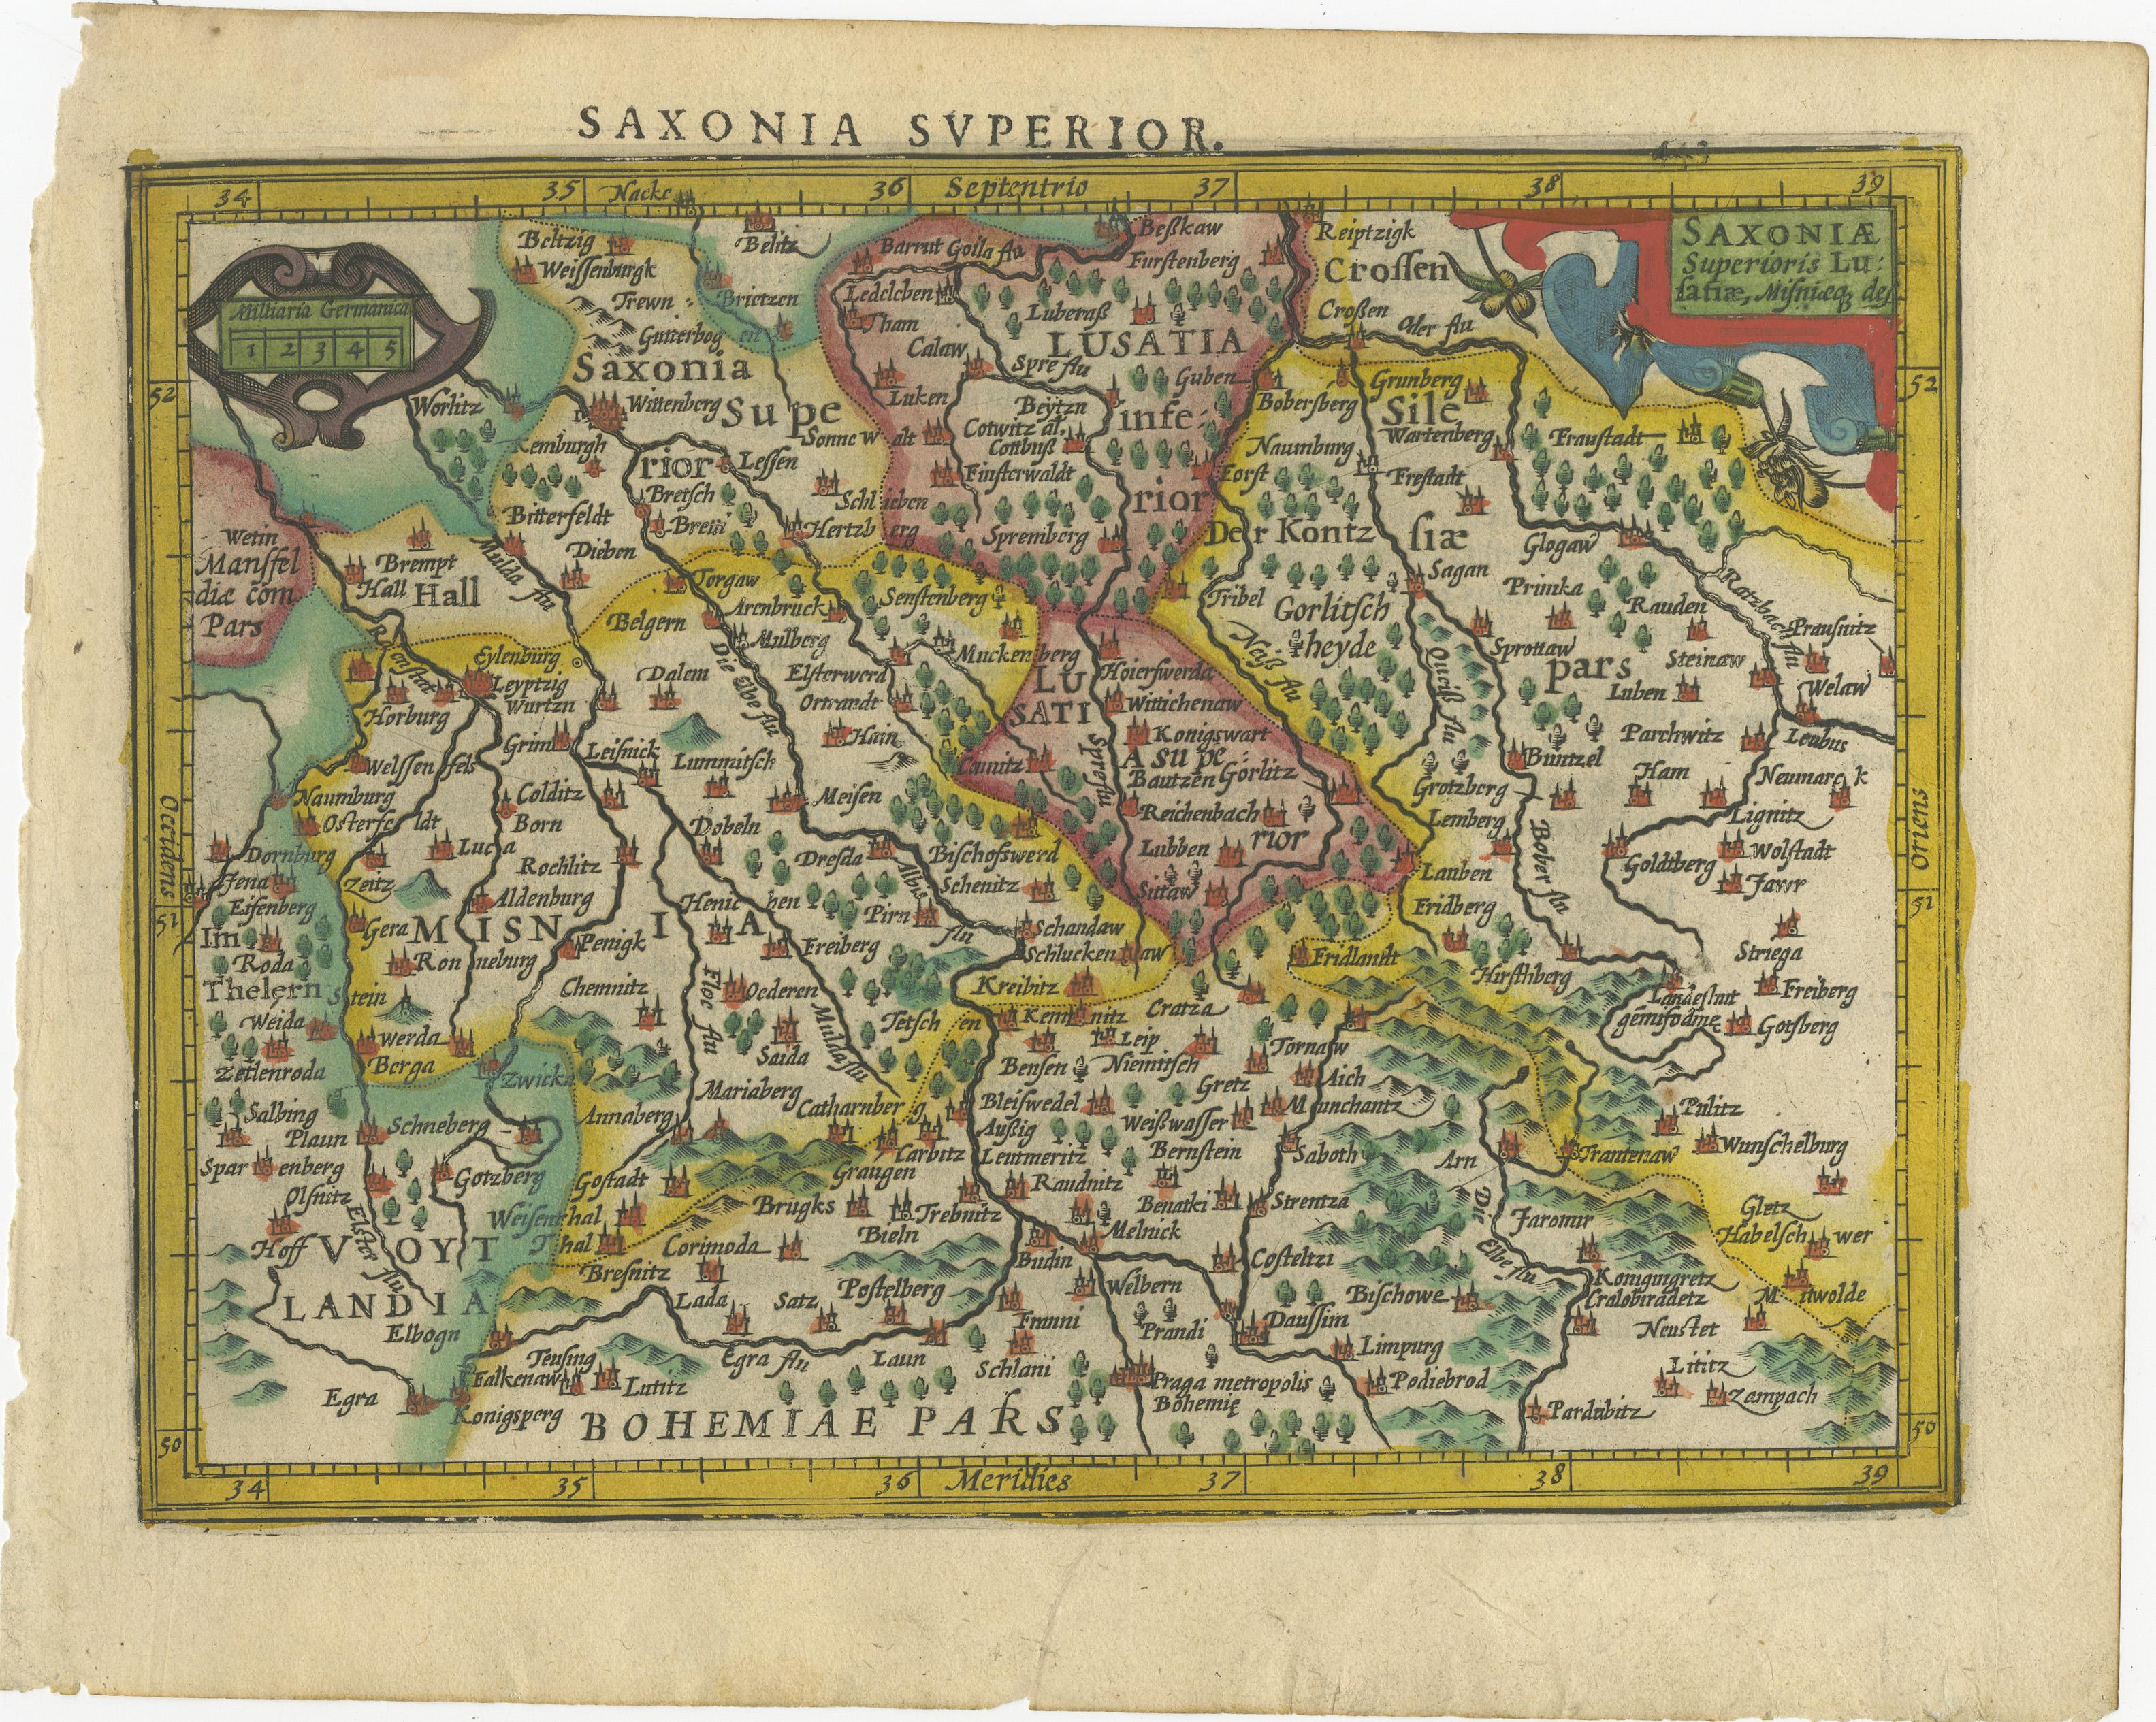 Antique map titled 'Saxonia Superior'. Small original antique map of Upper Saxony, Germany. Upper Saxony (German: Obersachsen) was the name given to the majority of the German lands held by the House of Wettin, in what is now called Central Germany